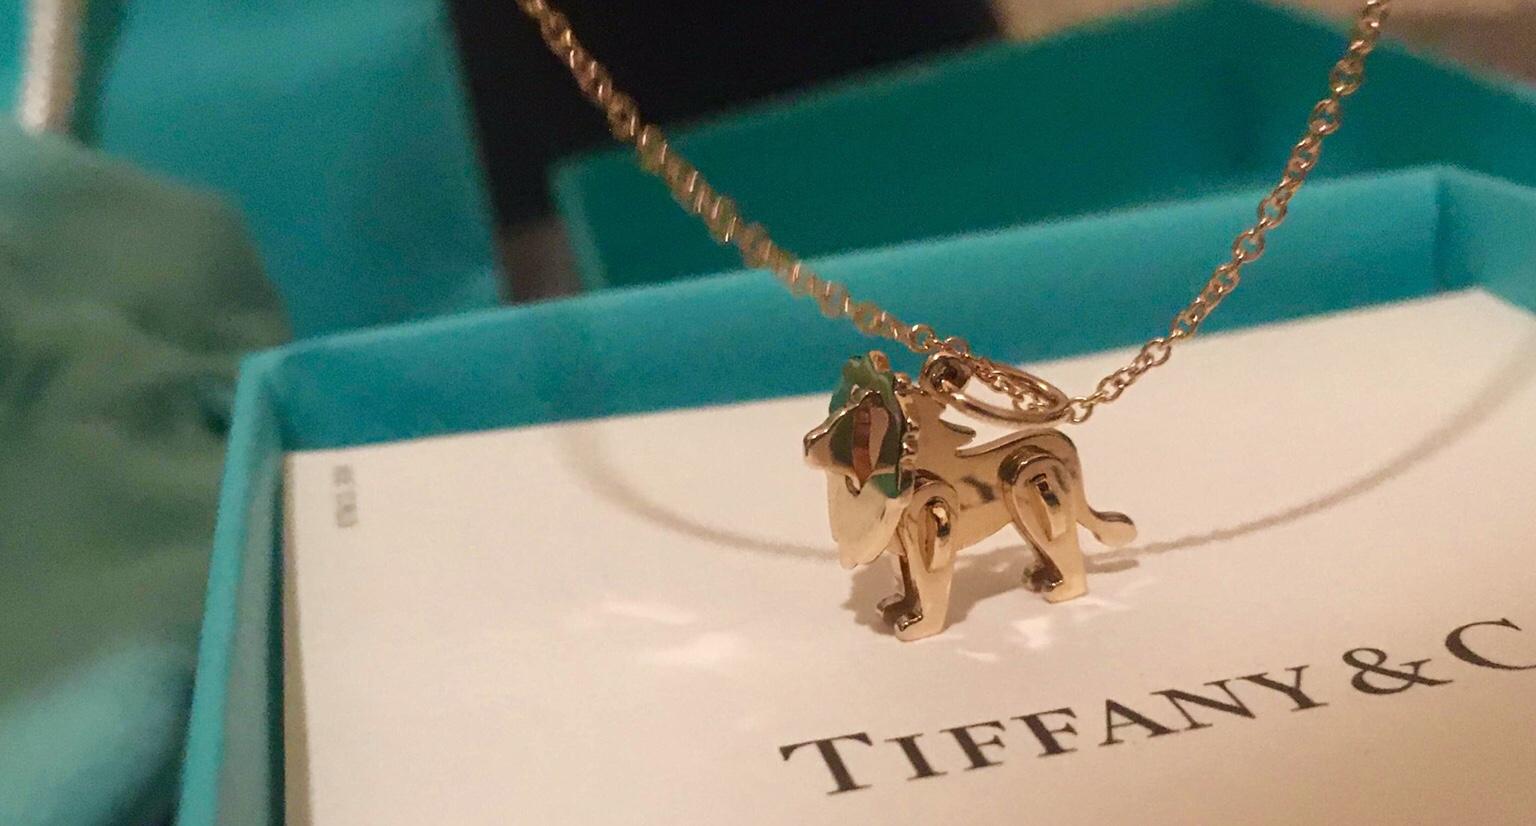 tiffany and co lion necklace